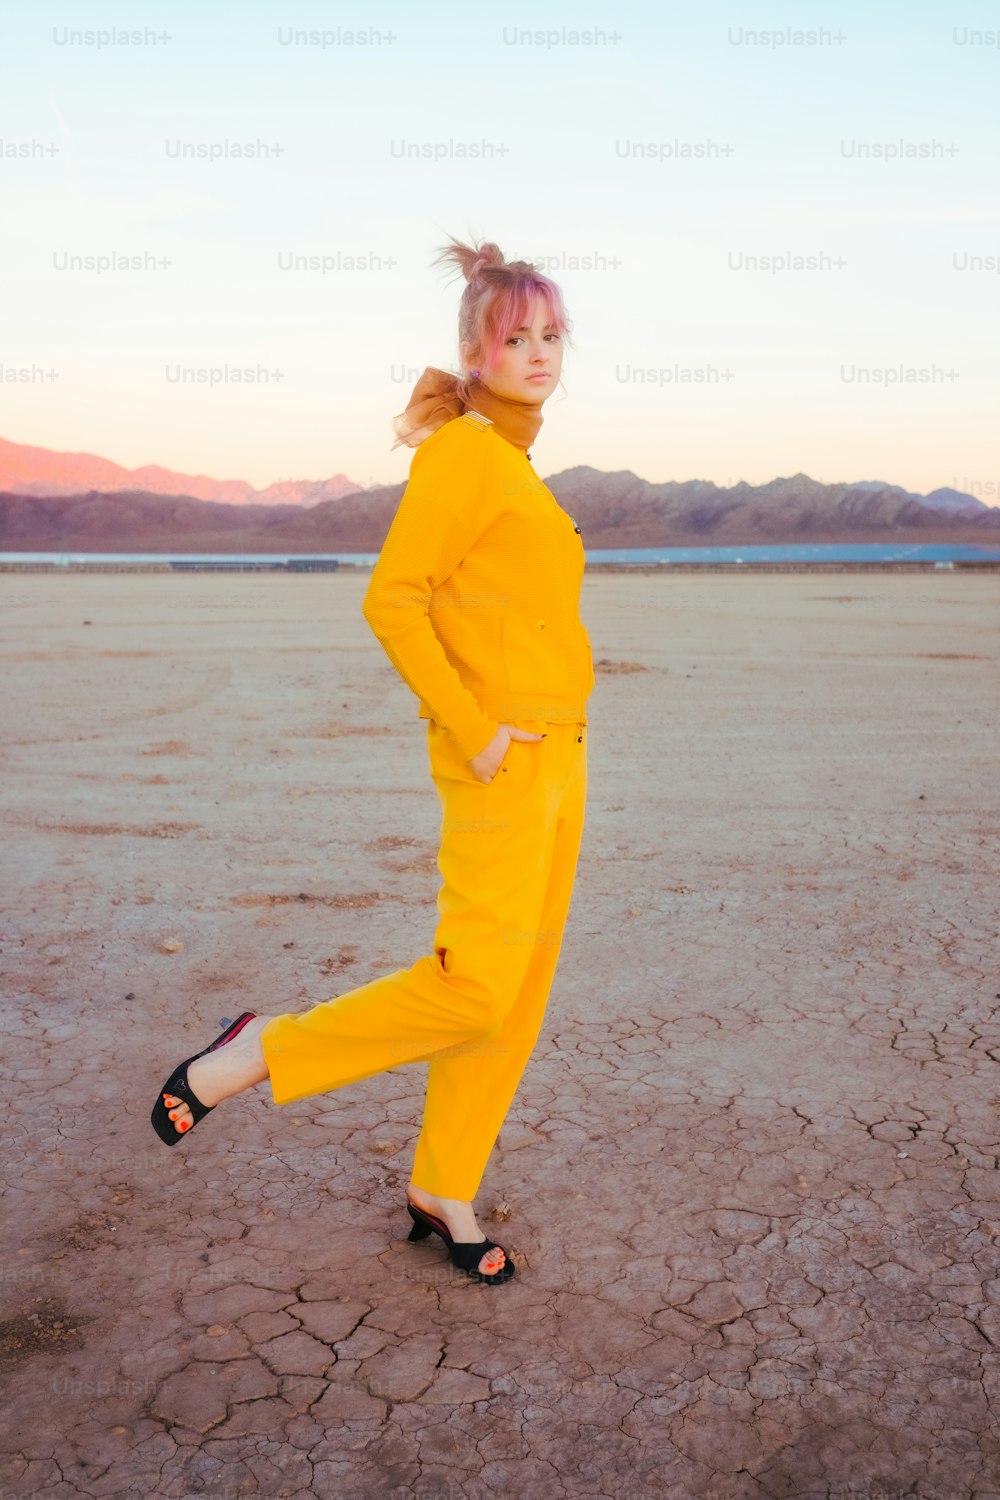 a woman in a yellow jumpsuit standing in a desert